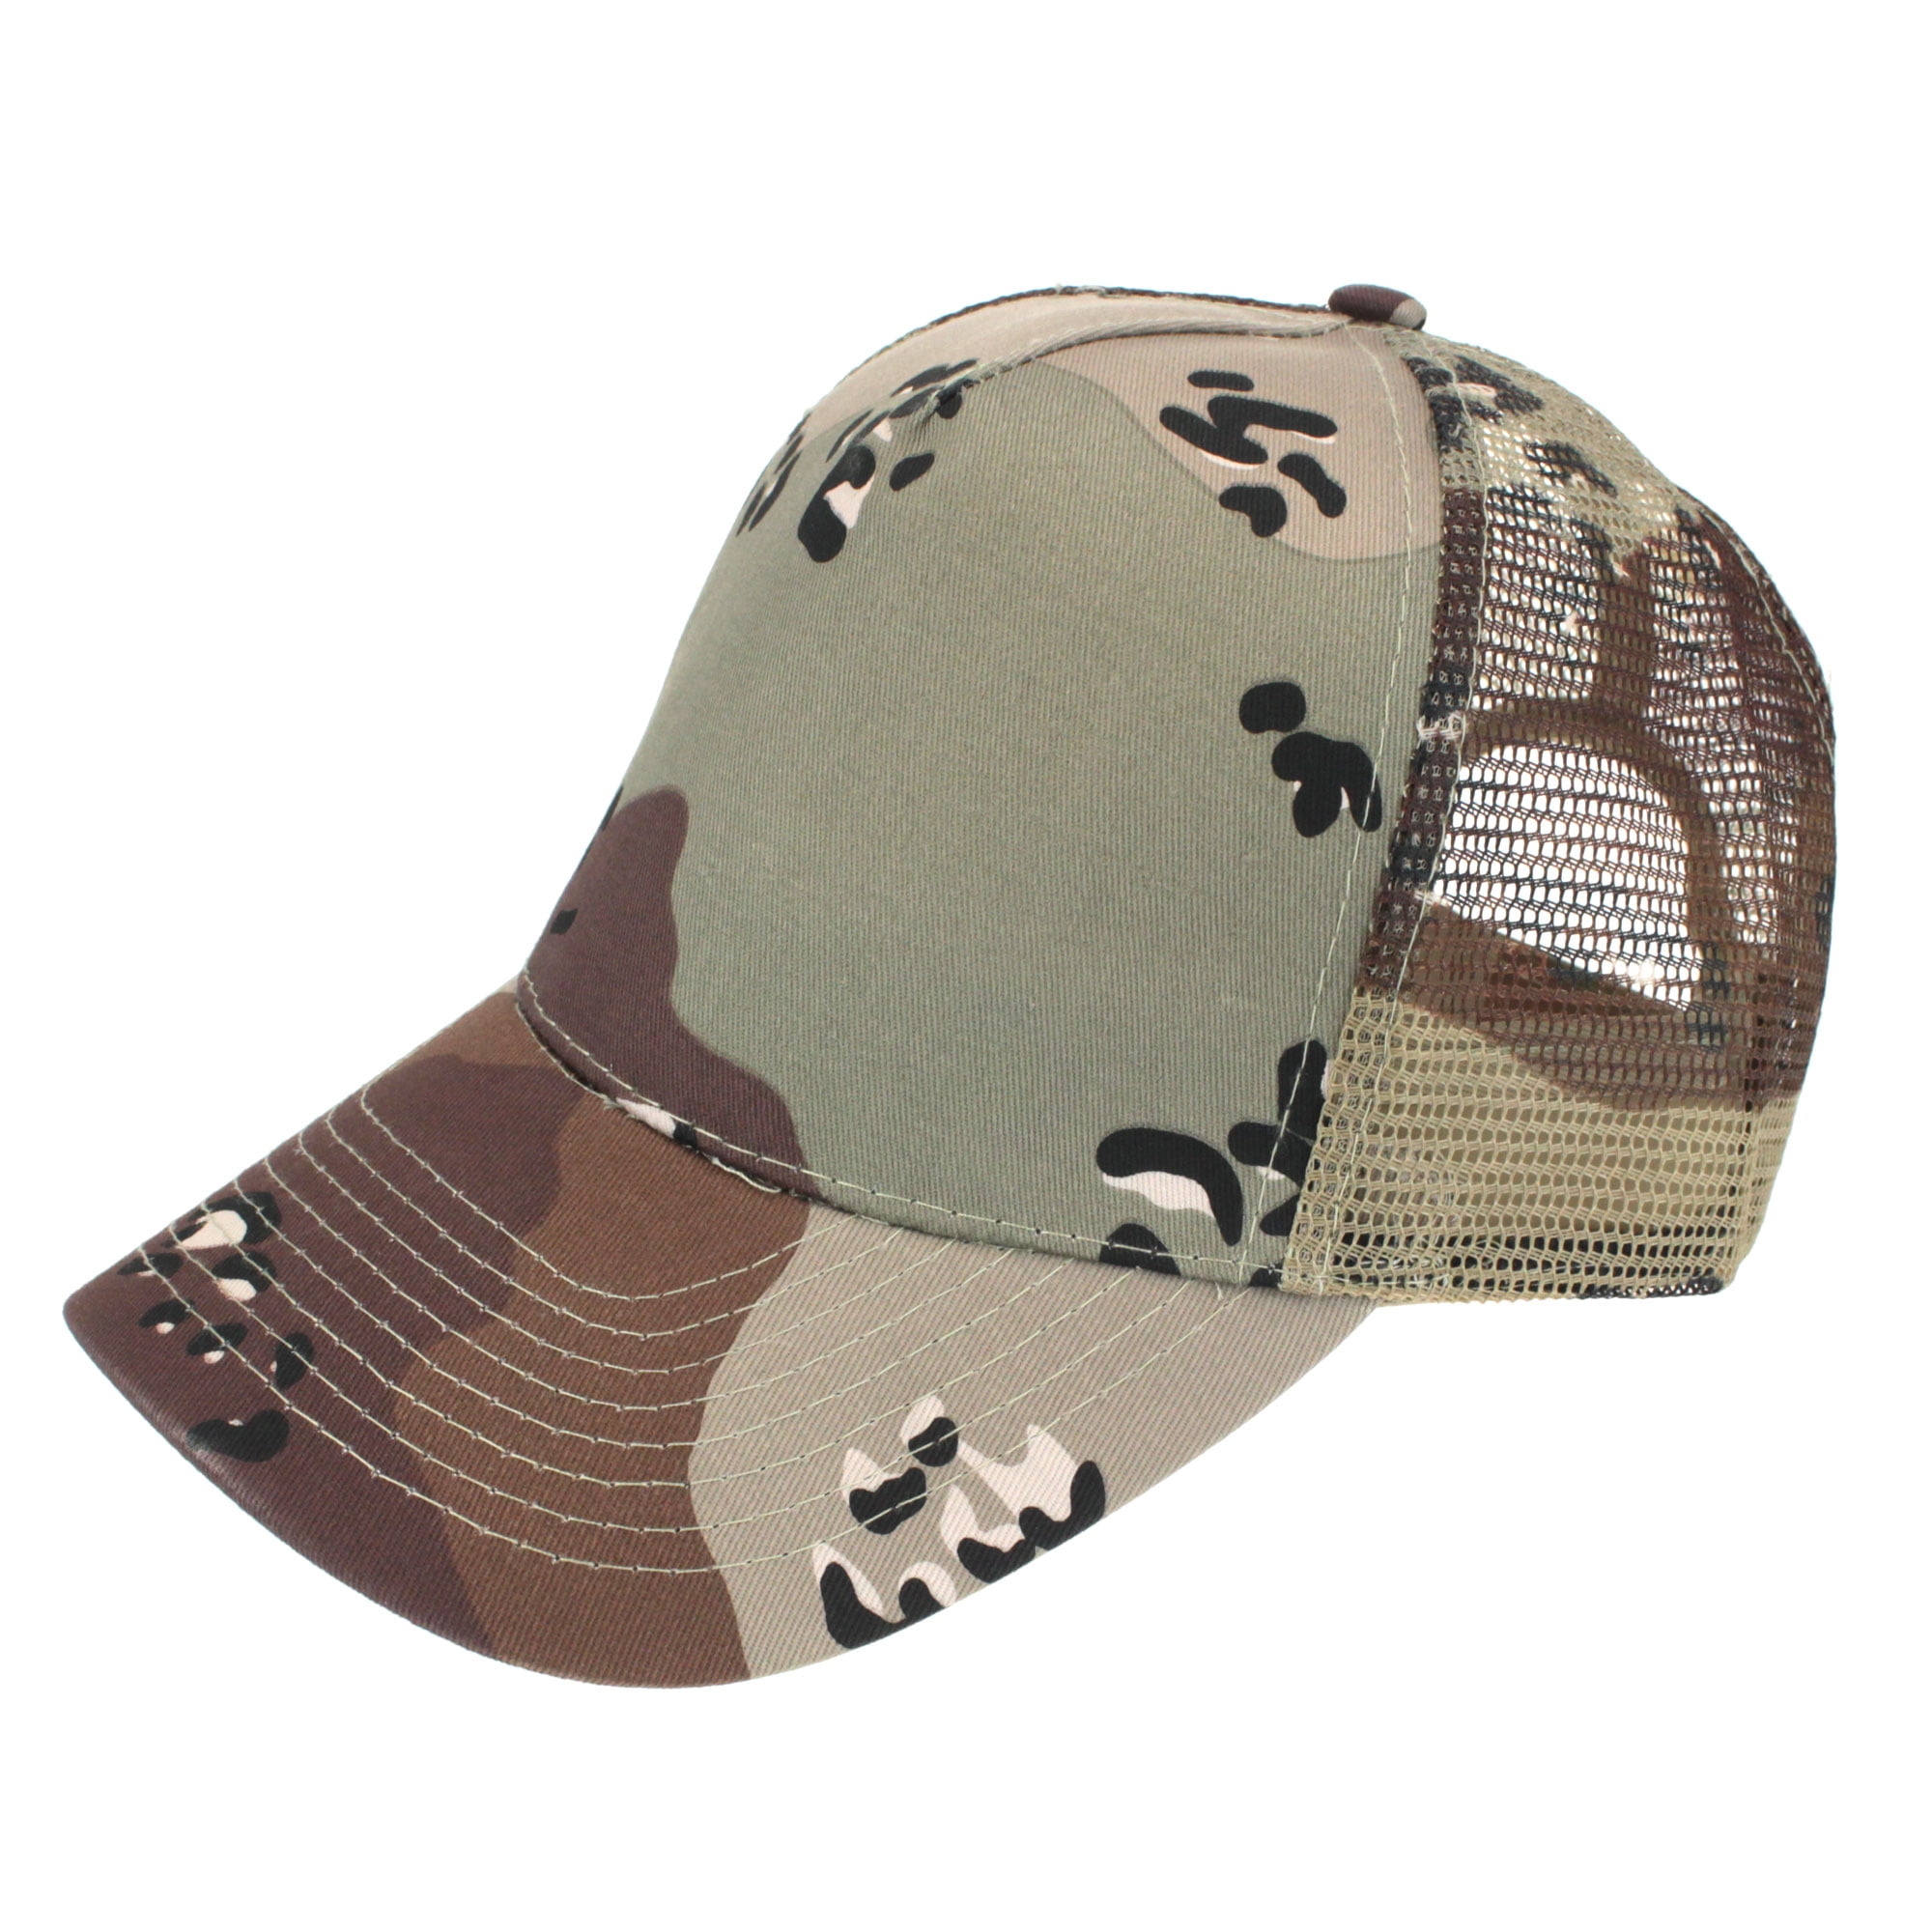 Lululemon Commission Variegated Mesh Camo Hat Men's One Size Snapback for  Sale in Mustang Ridge, TX - OfferUp